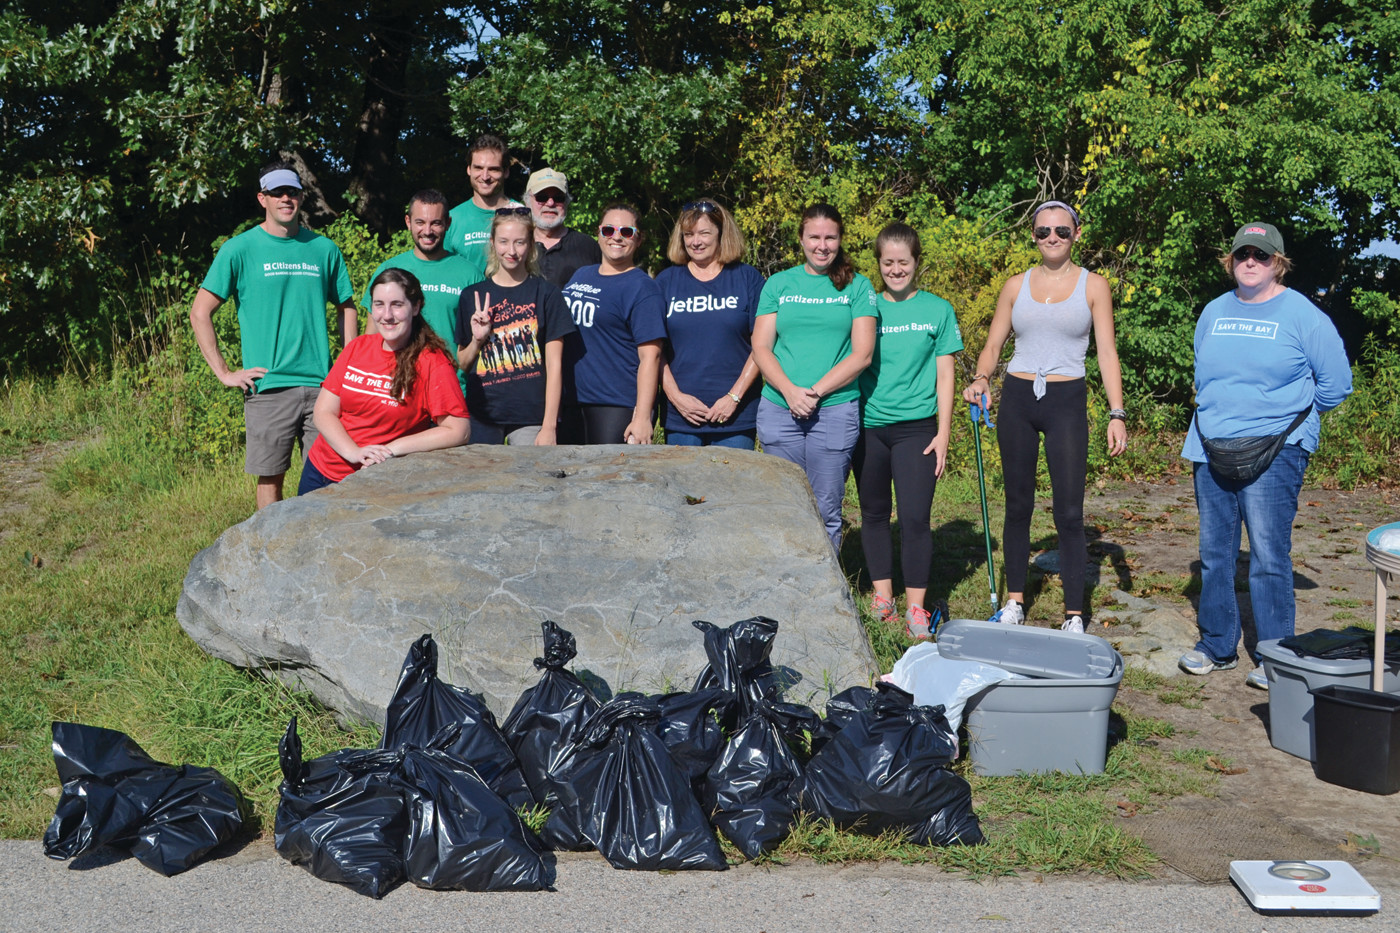 TEAMWORK: In just two hours, 12 volunteers helped remove 86 pounds of trash from Salter Grove. Volunteers came from Save the Bay, Citizens Bank, Jet Blue and elsewhere in the city.